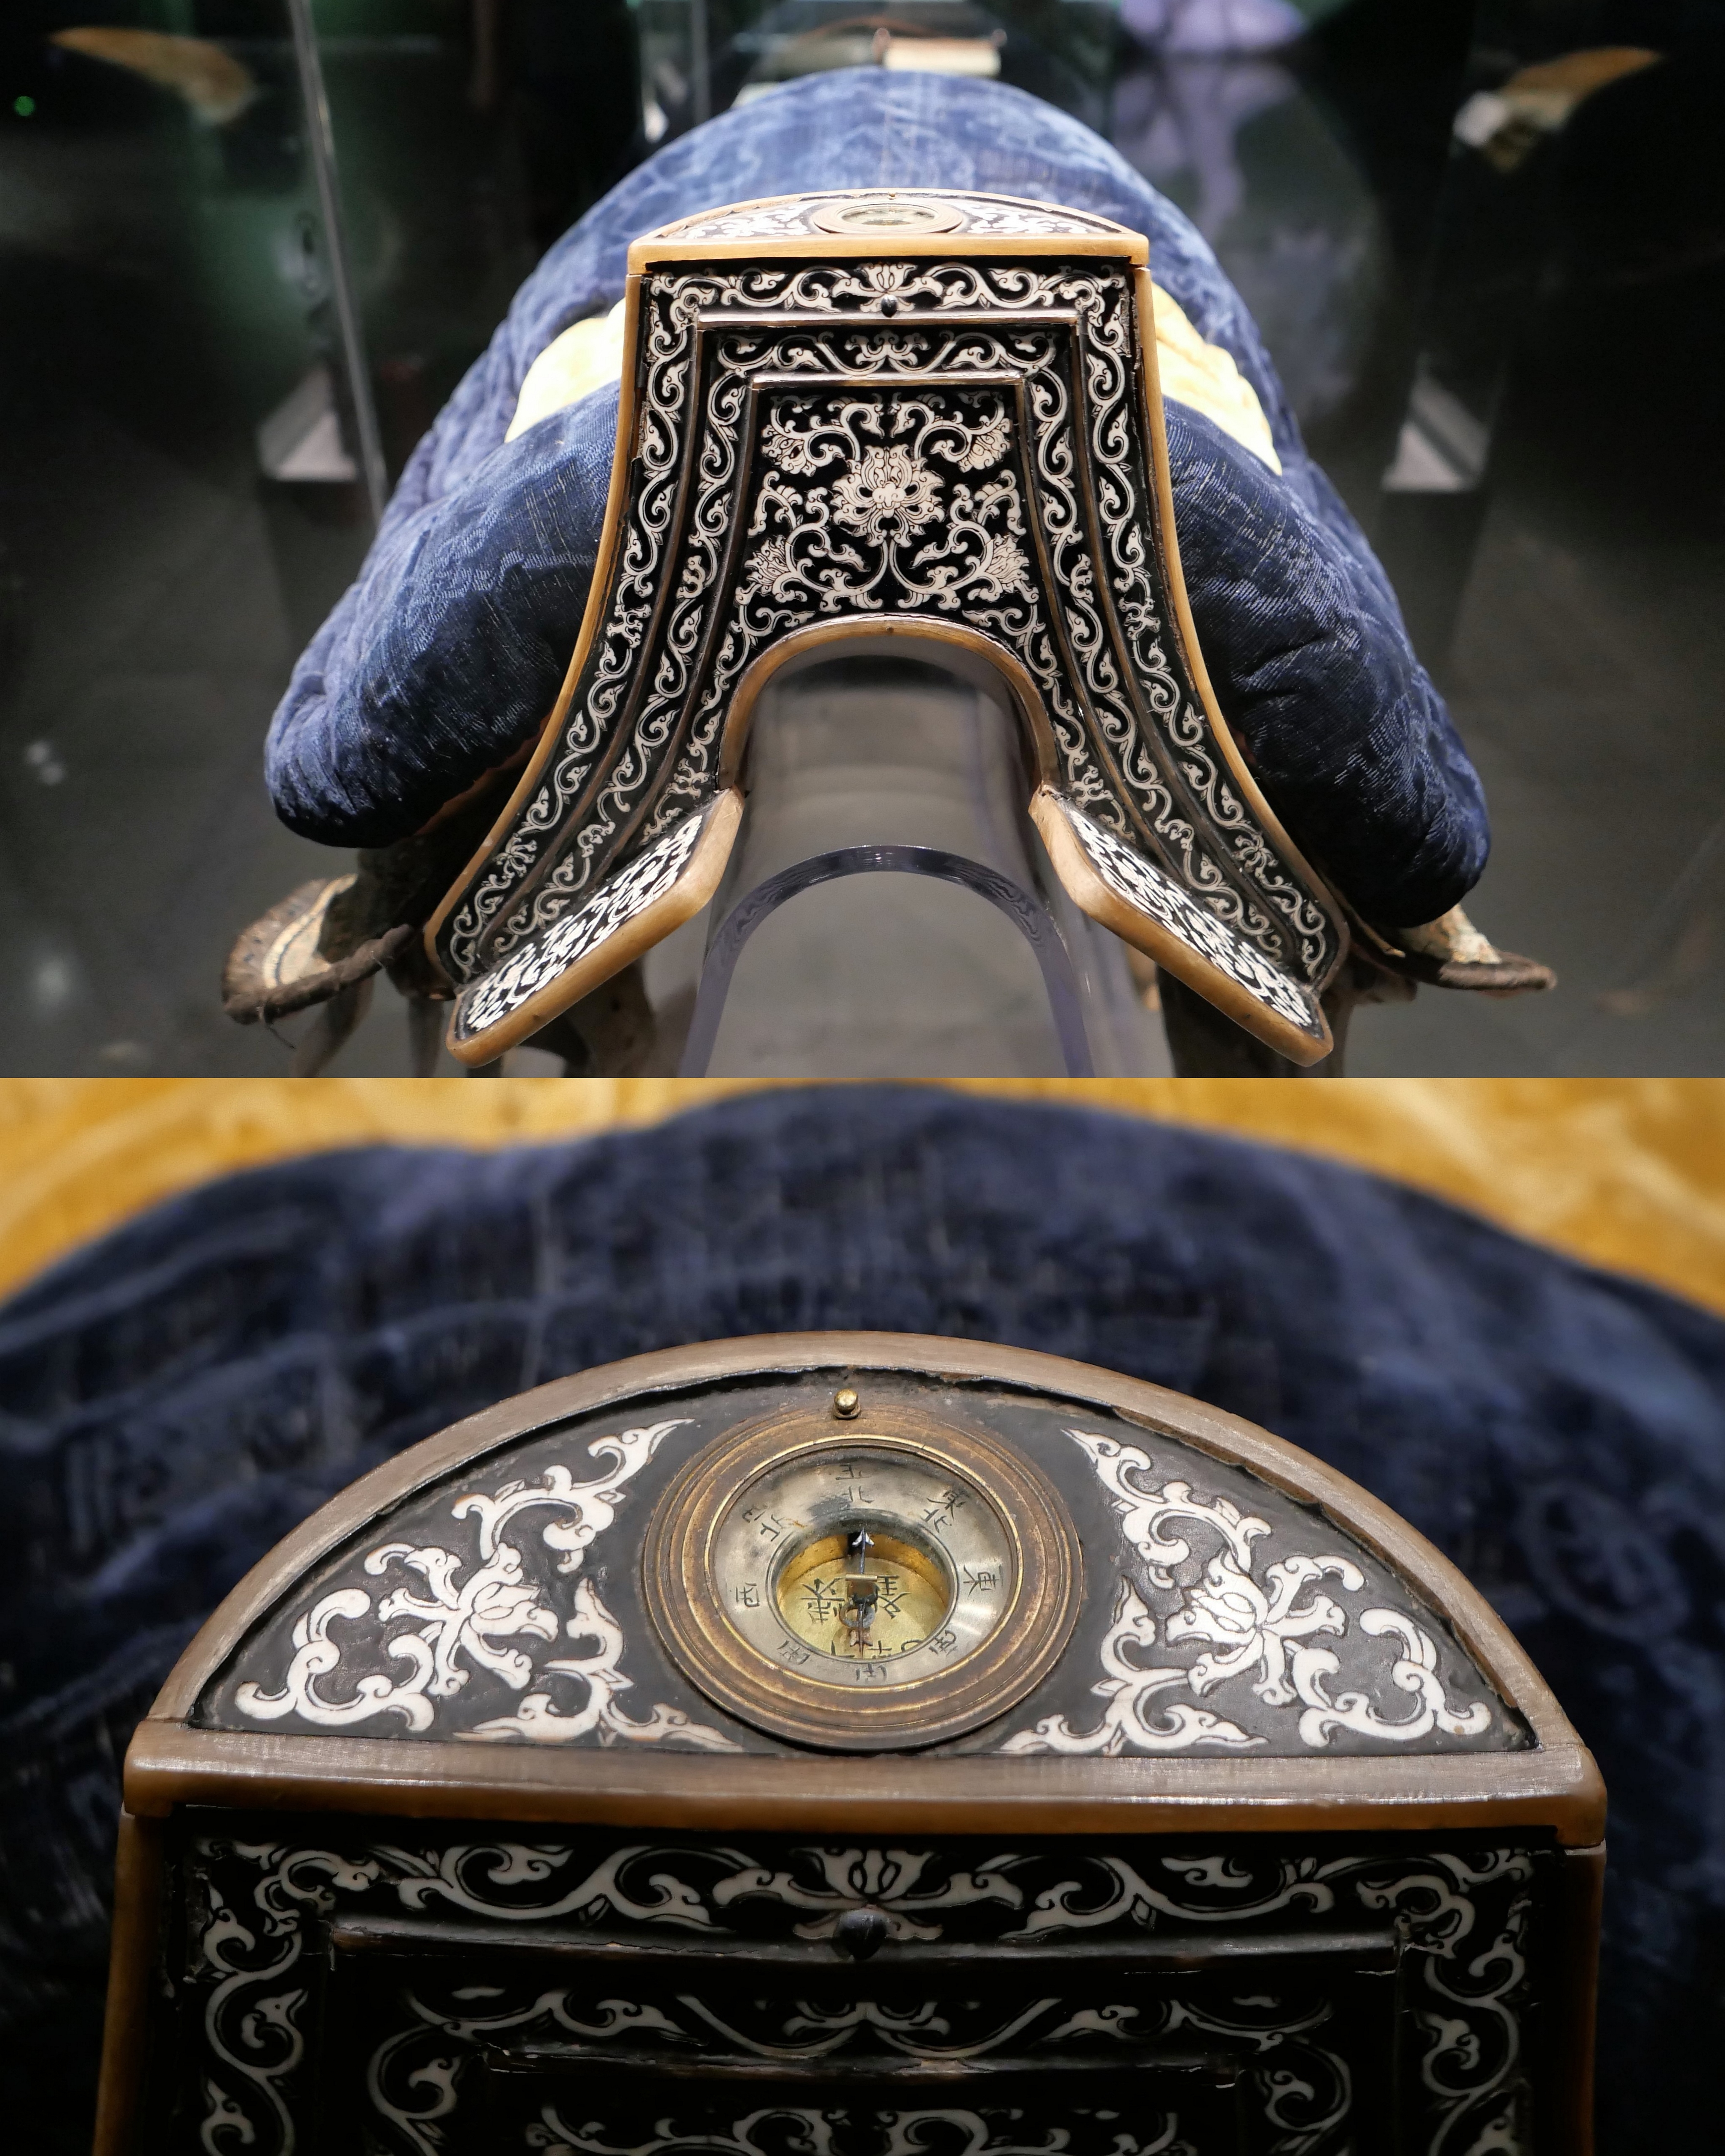 Saddle embedded with a compass. Qing dynasty, China, 18th century.jpg